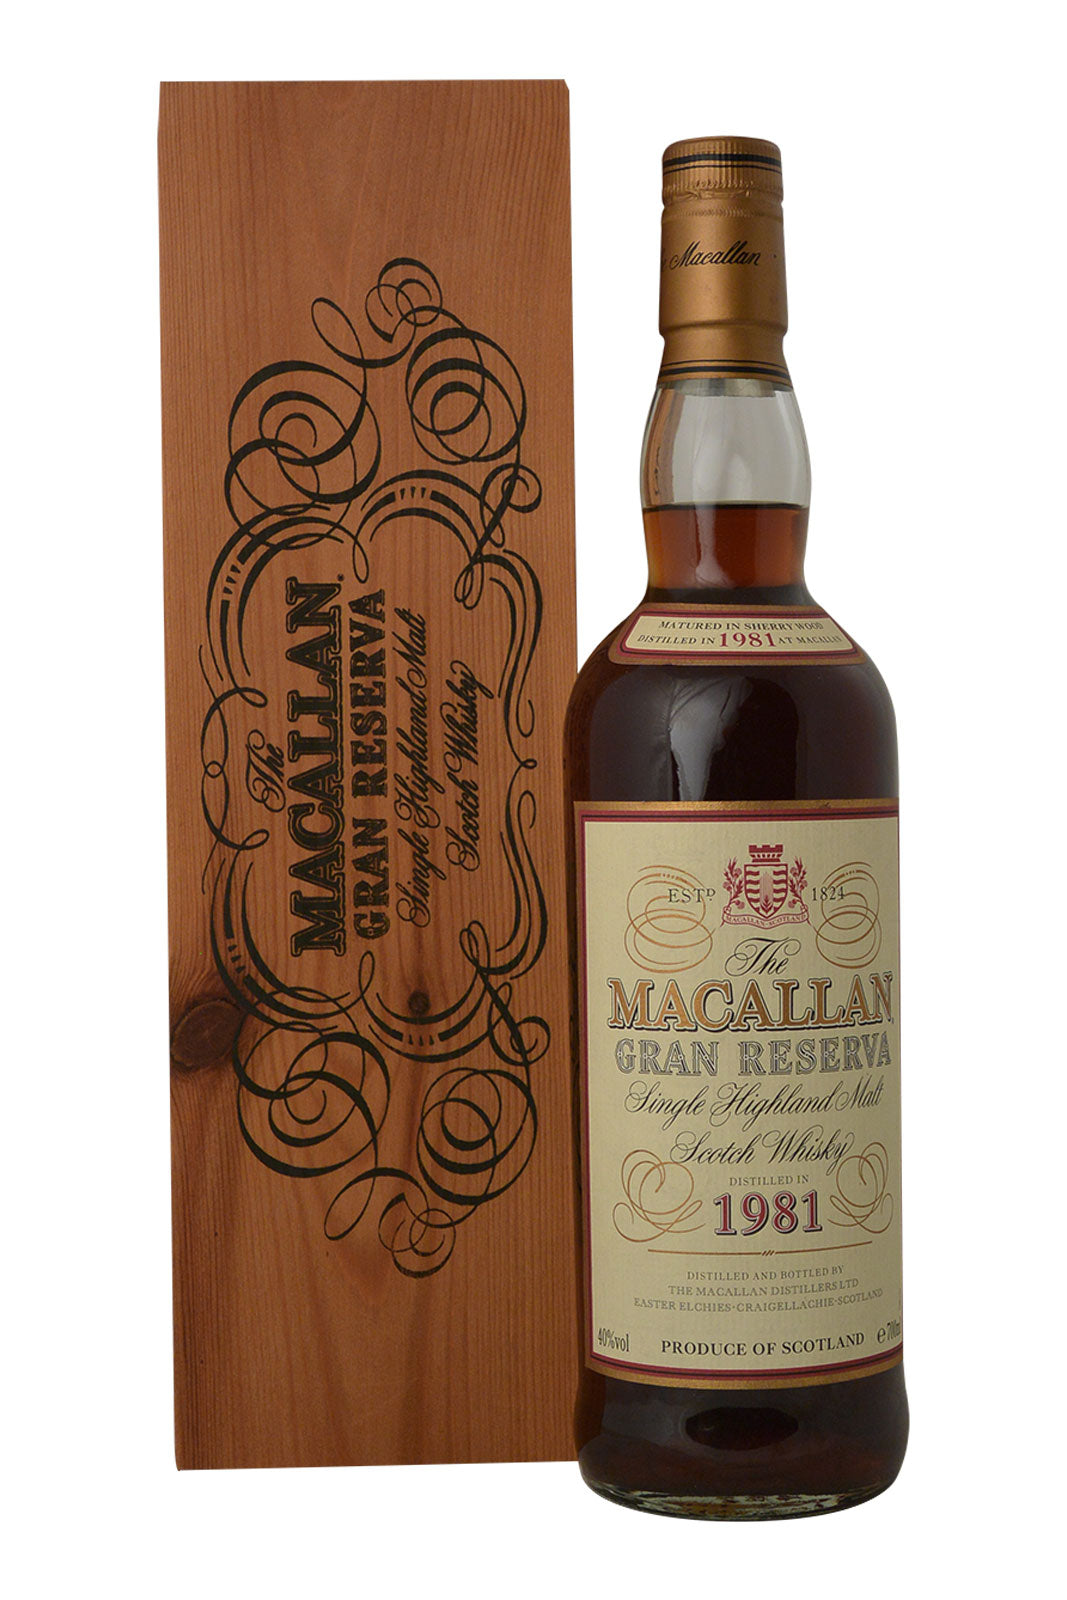 Macallan Gran Reserve 1981 - A piece of whisky history